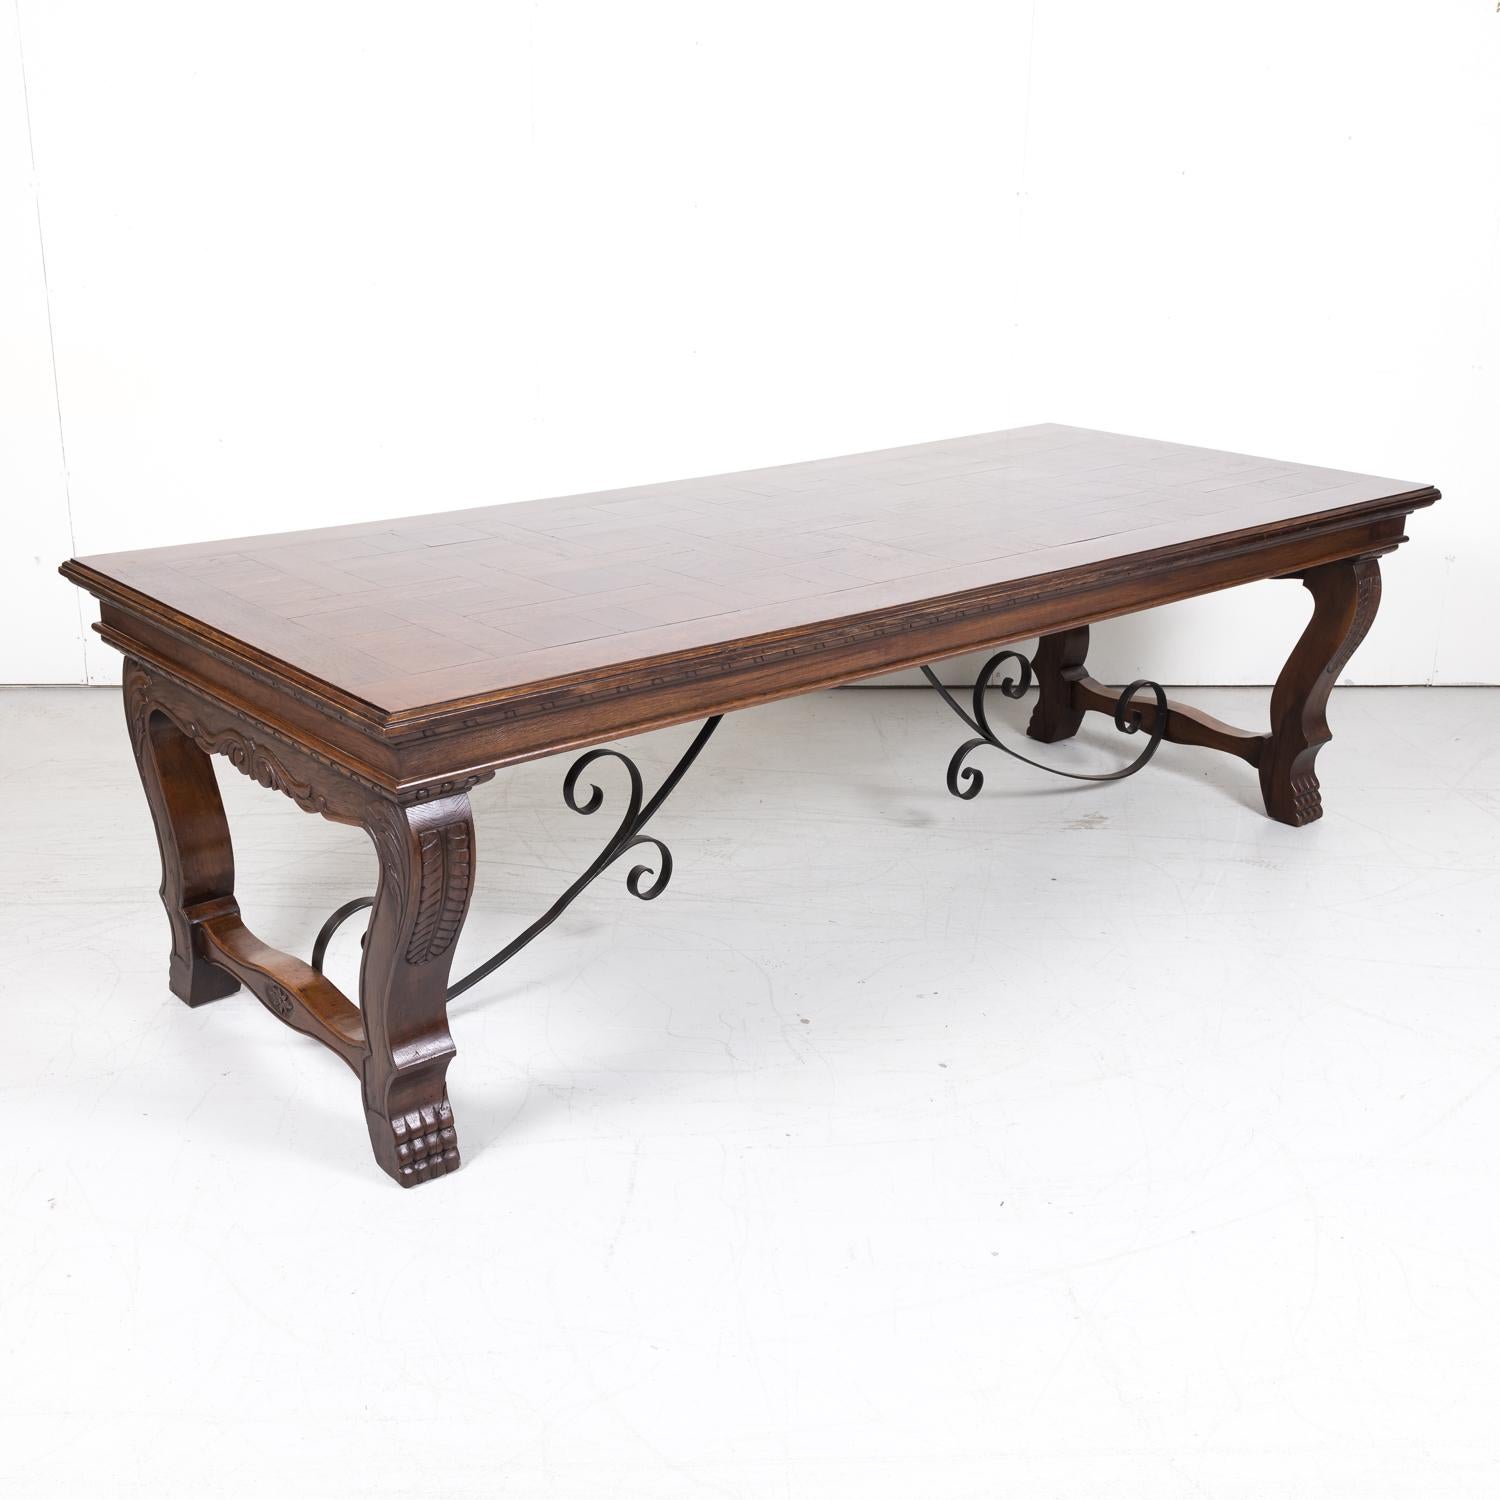 A carved French Renaissance style dining table handcrafted near Bordeaux of old growth French oak, circa 1920s. Having a rectangular parquet top with stepped gadrooned edge over a carved skirt, this antique French table with its rich, deep patina